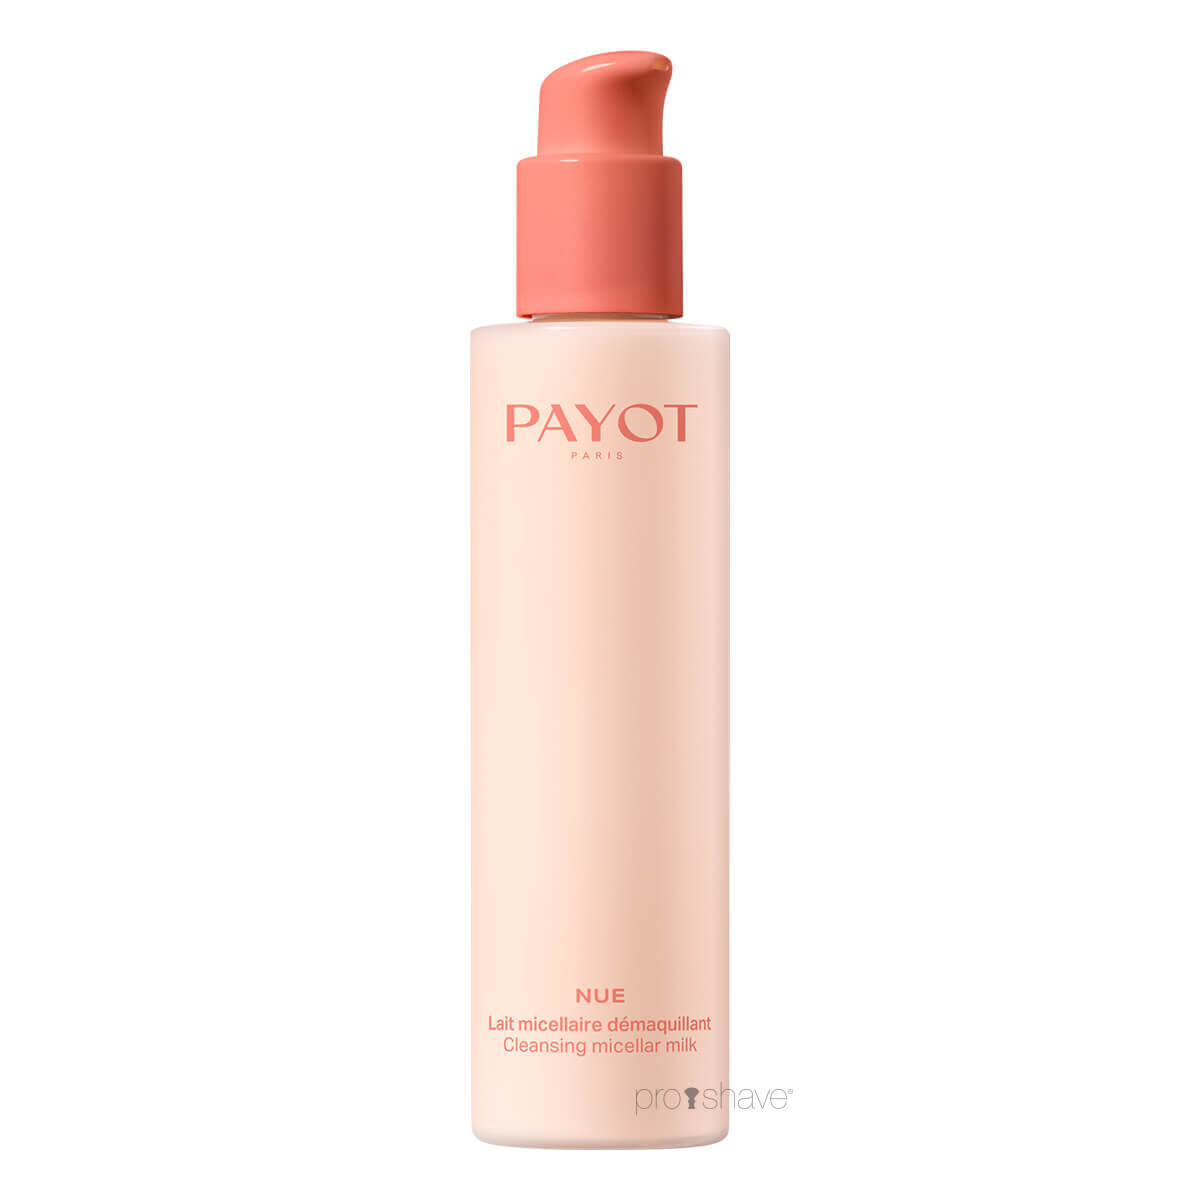 Se Payot Nue Micellaire Cleansing Milk, 200 ml. hos Proshave